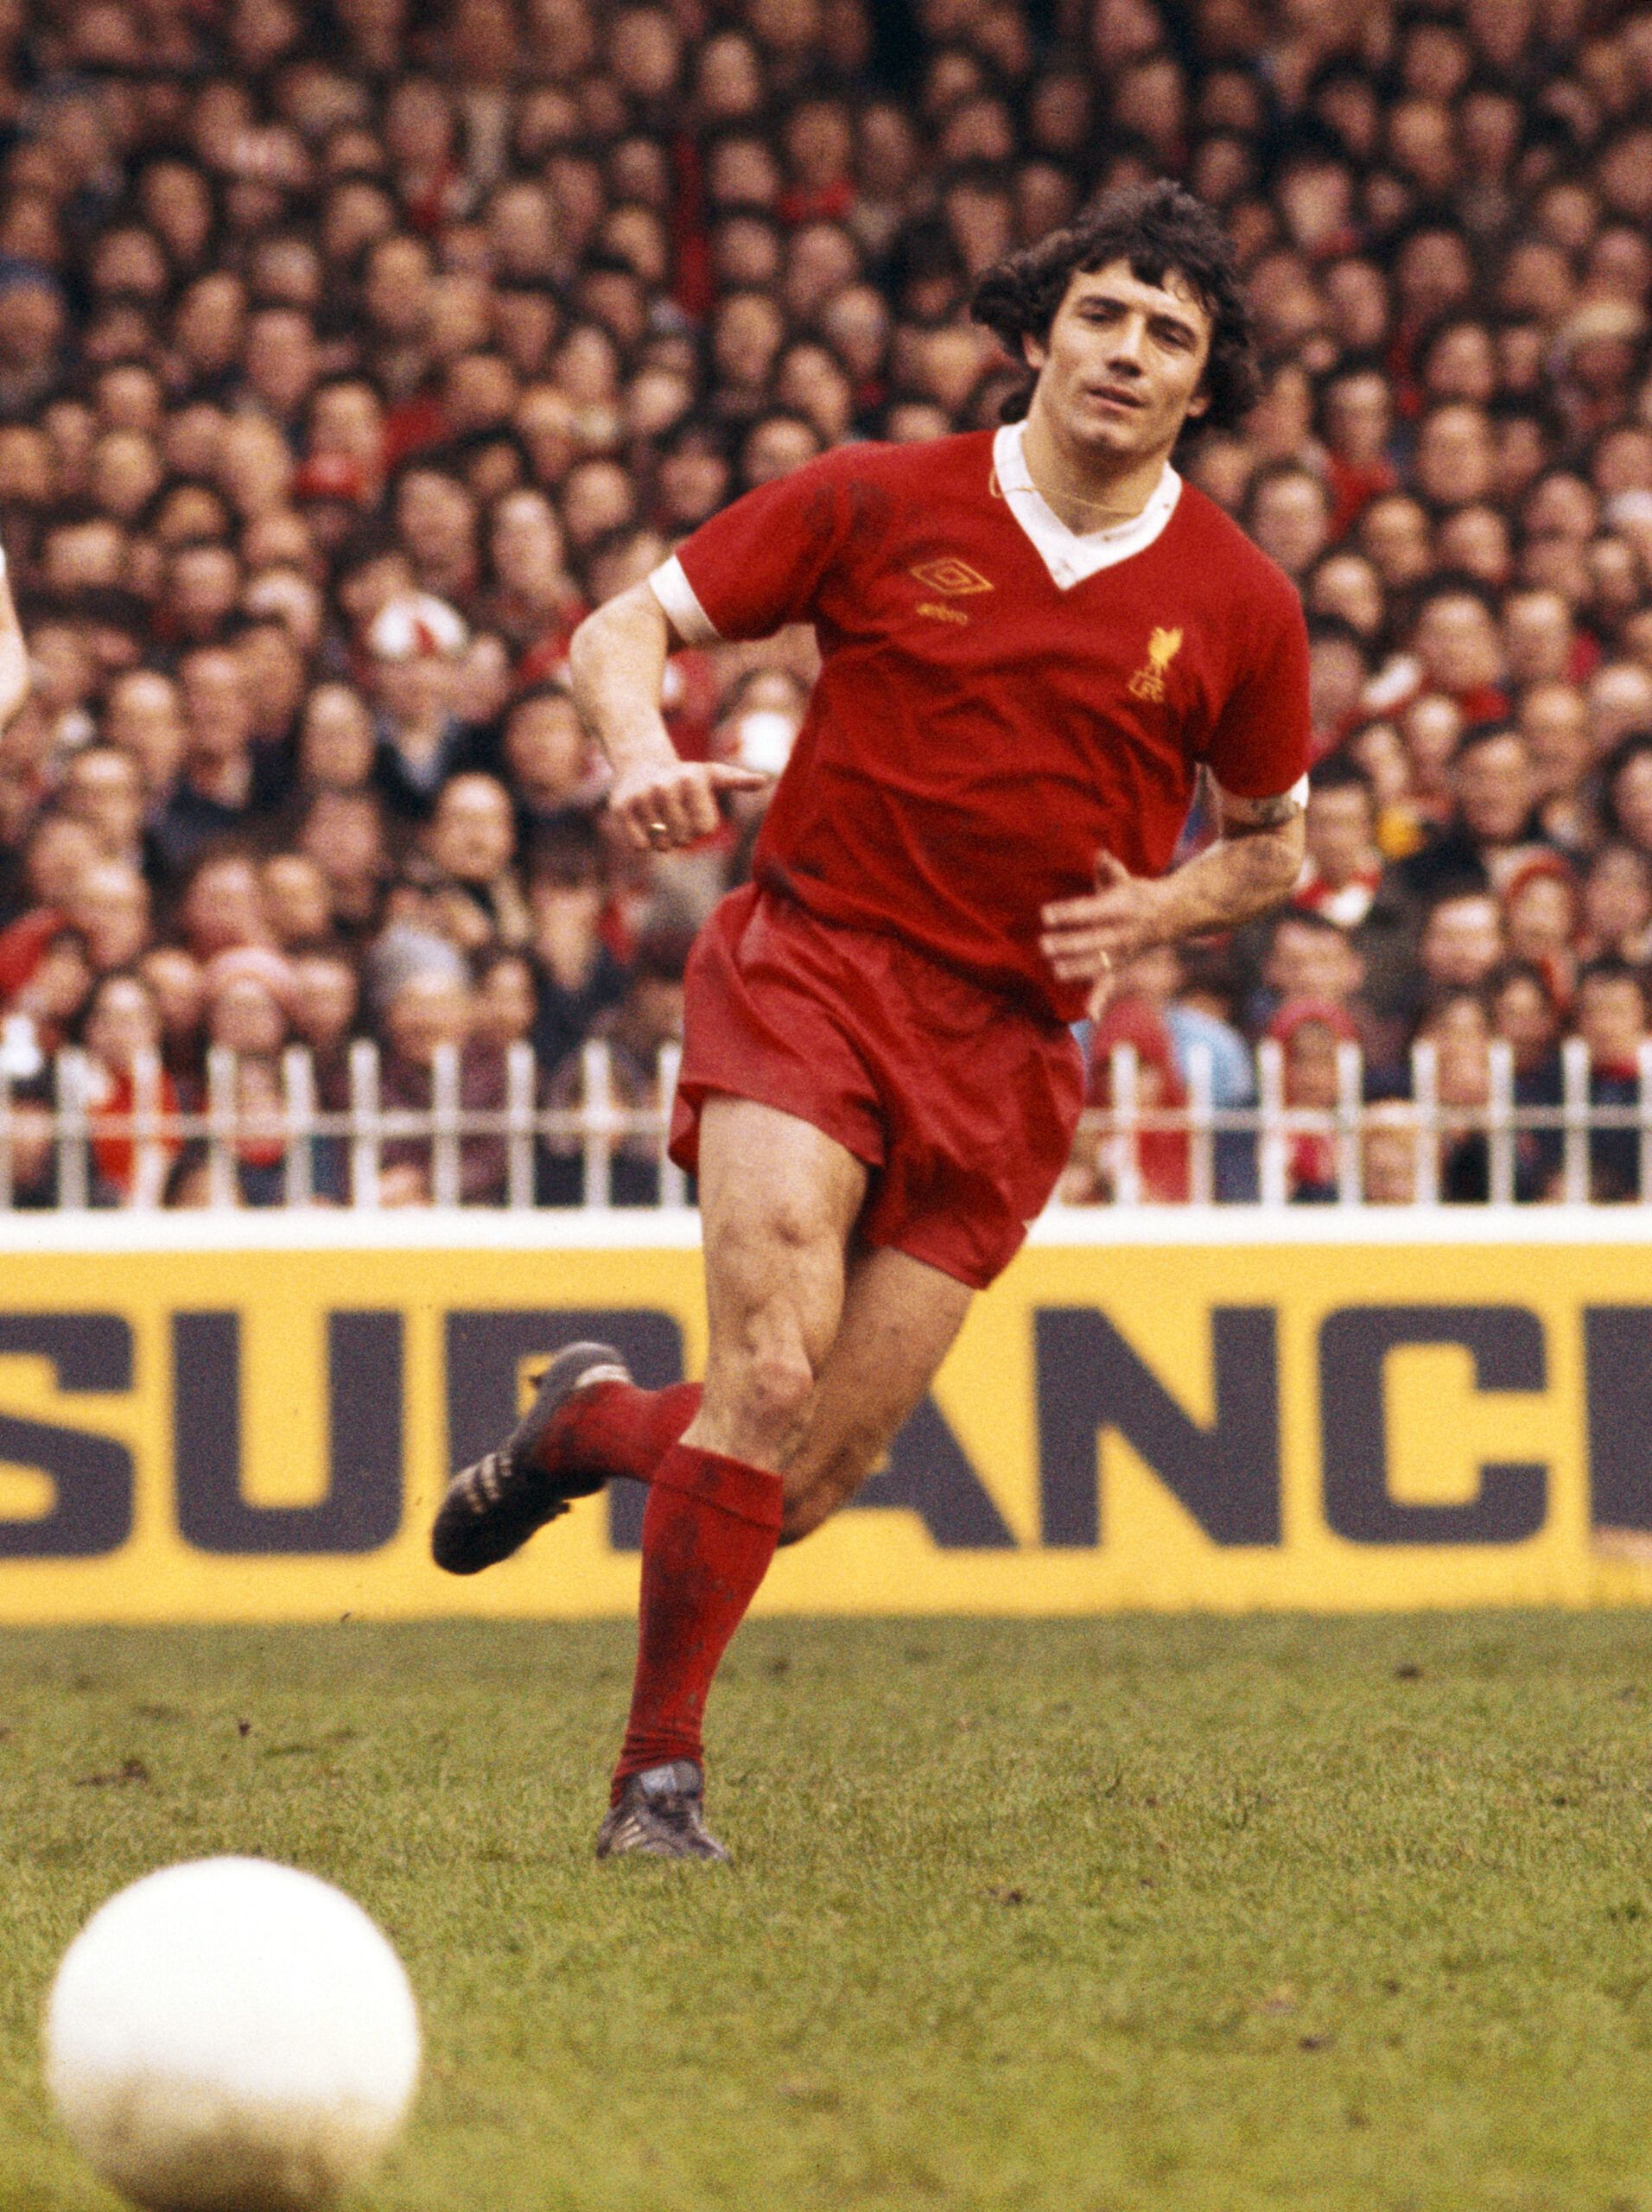 Keegan playing in a vintage Liverpool shirt.